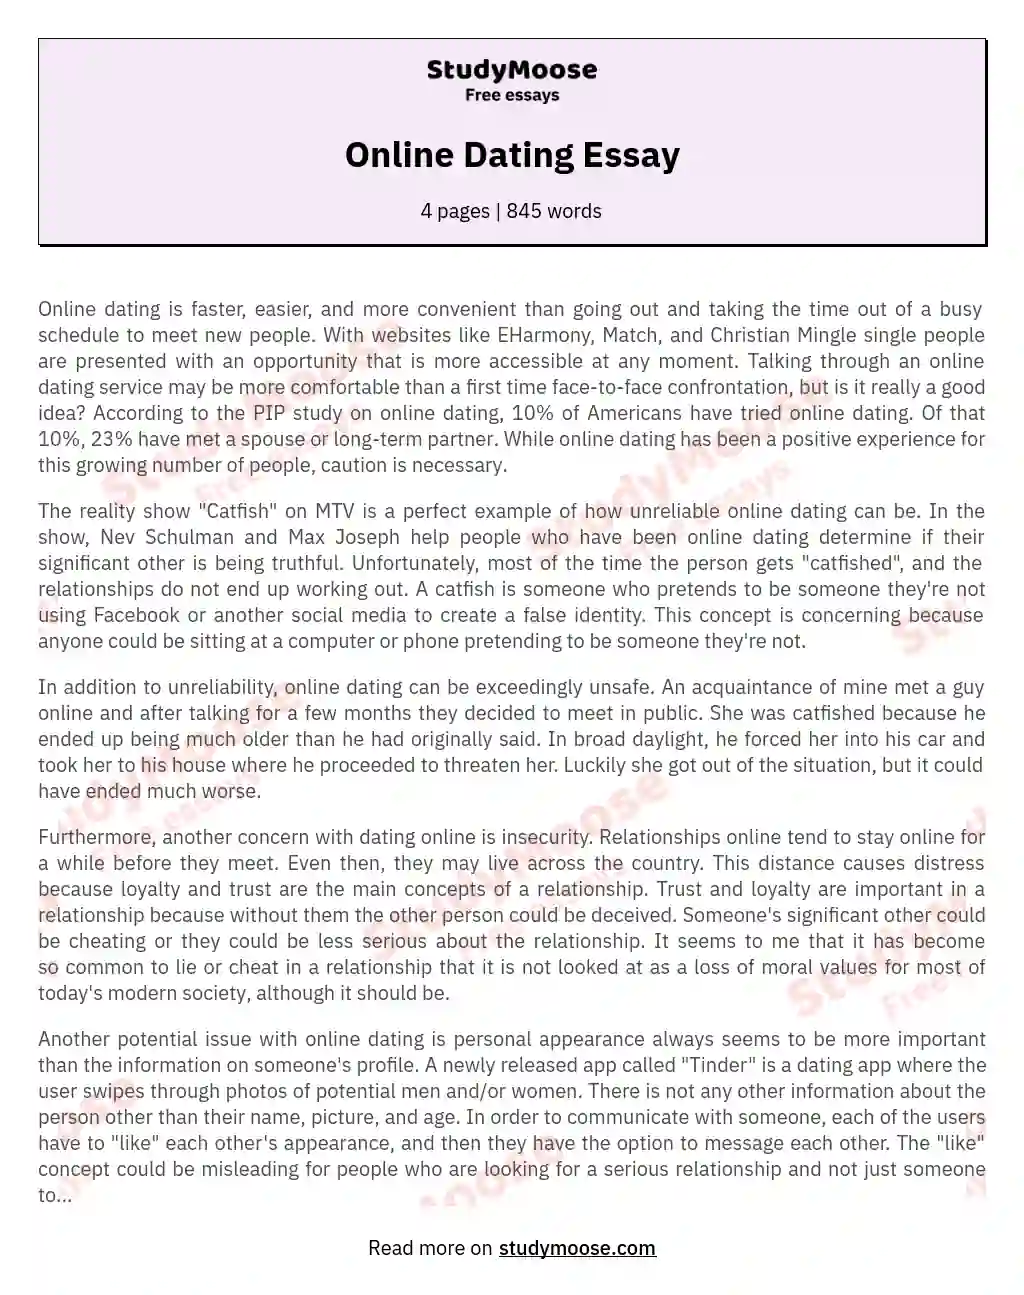 effects of online dating essay